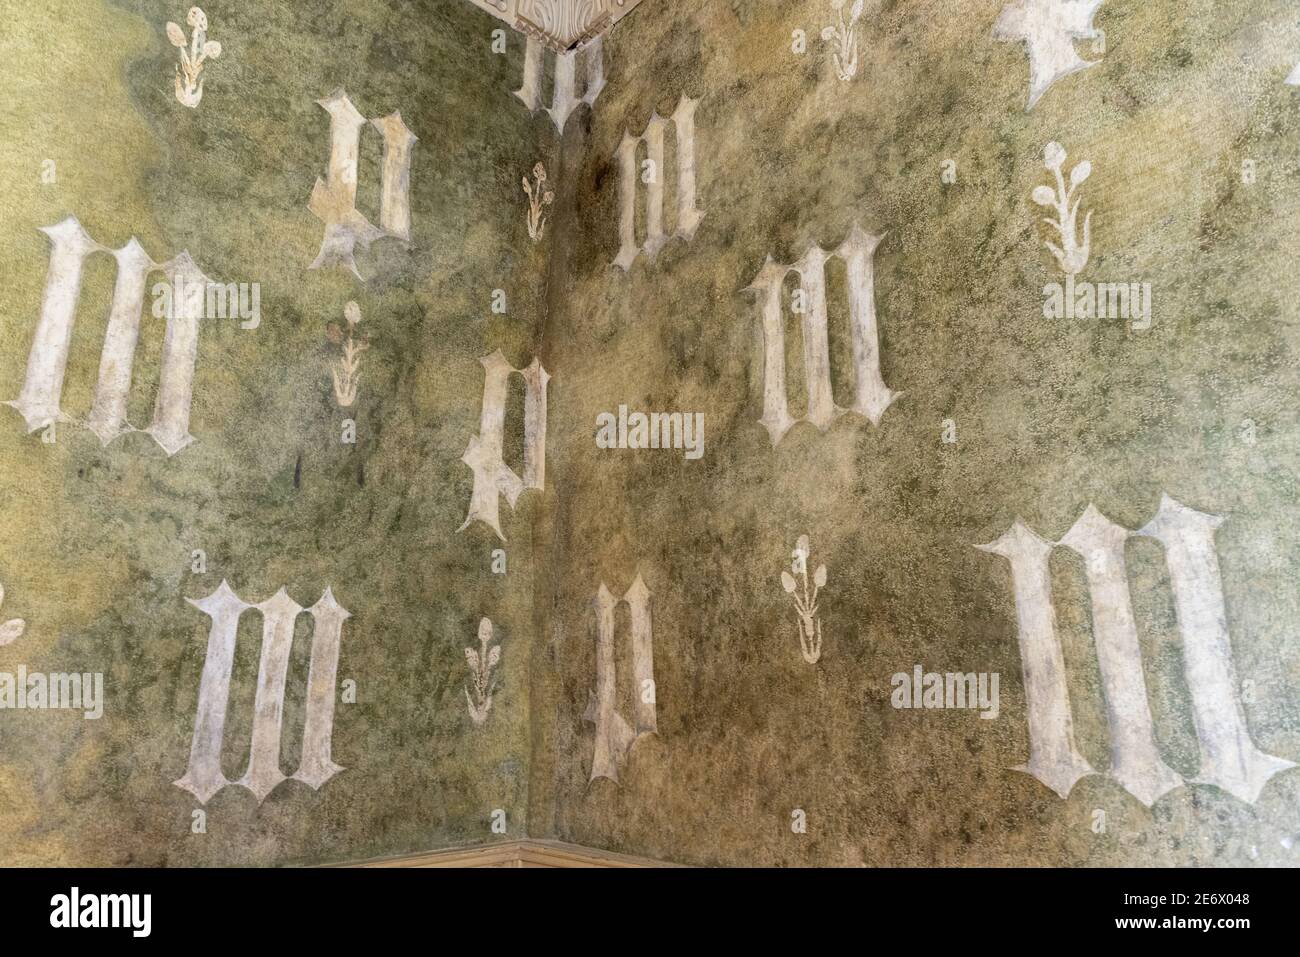 France, Saone et Loire, Germolles, Mellecey, Germolles Castle, 14th century wall paintings by Jean de Beaumetz in the apartments of Marguerite de Flandre, initials of Philippe le Hardi Duke of Burgundy and Marguerite de Flanders his wife Stock Photo